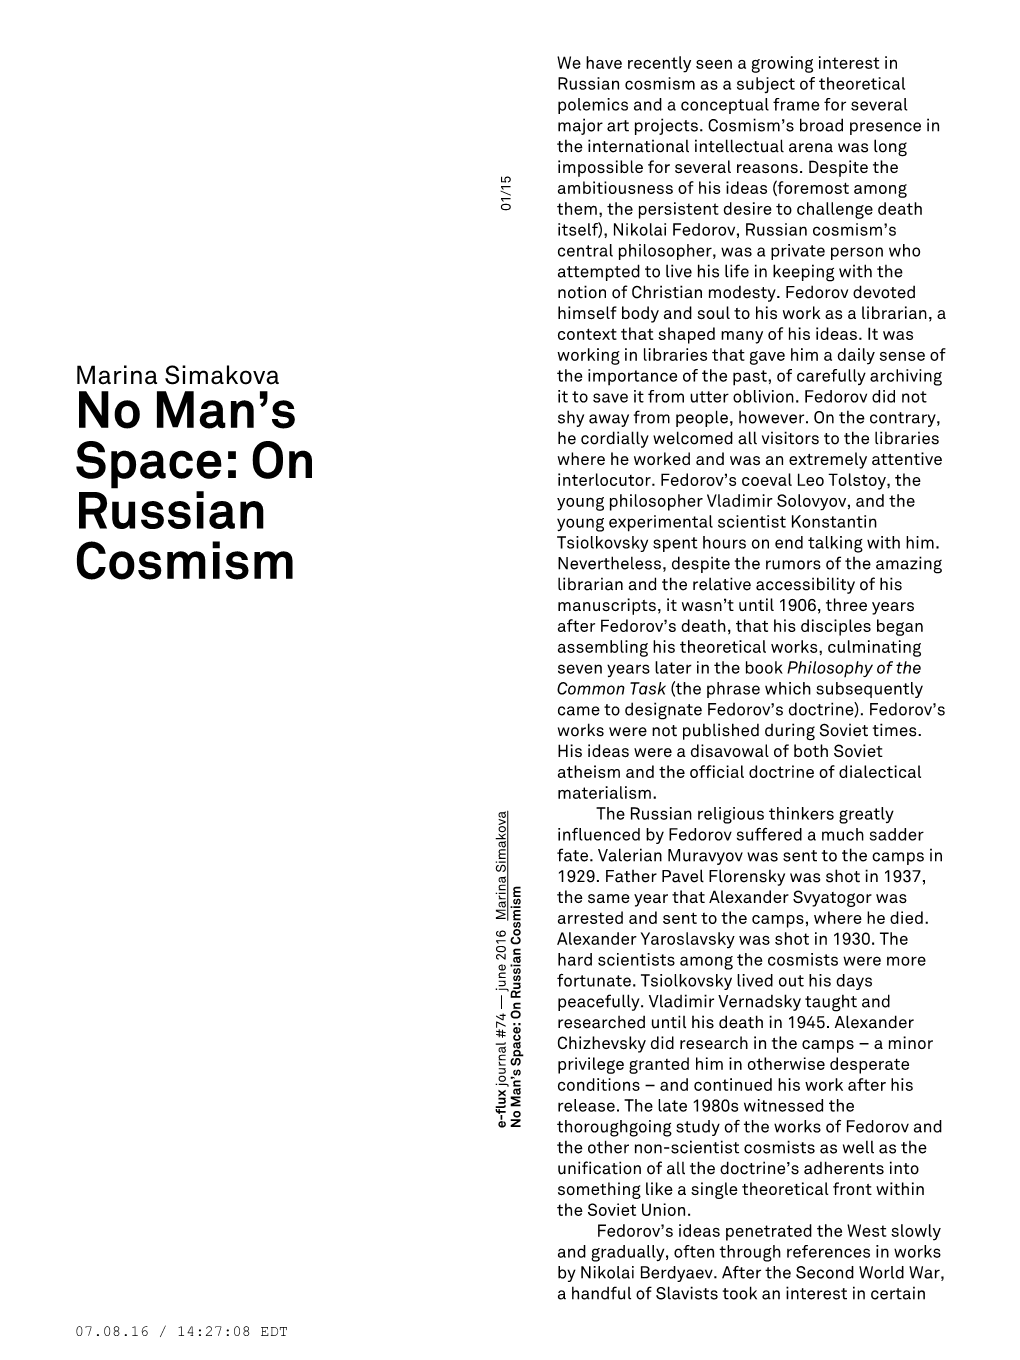 No Man's Space: on Russian Cosmism